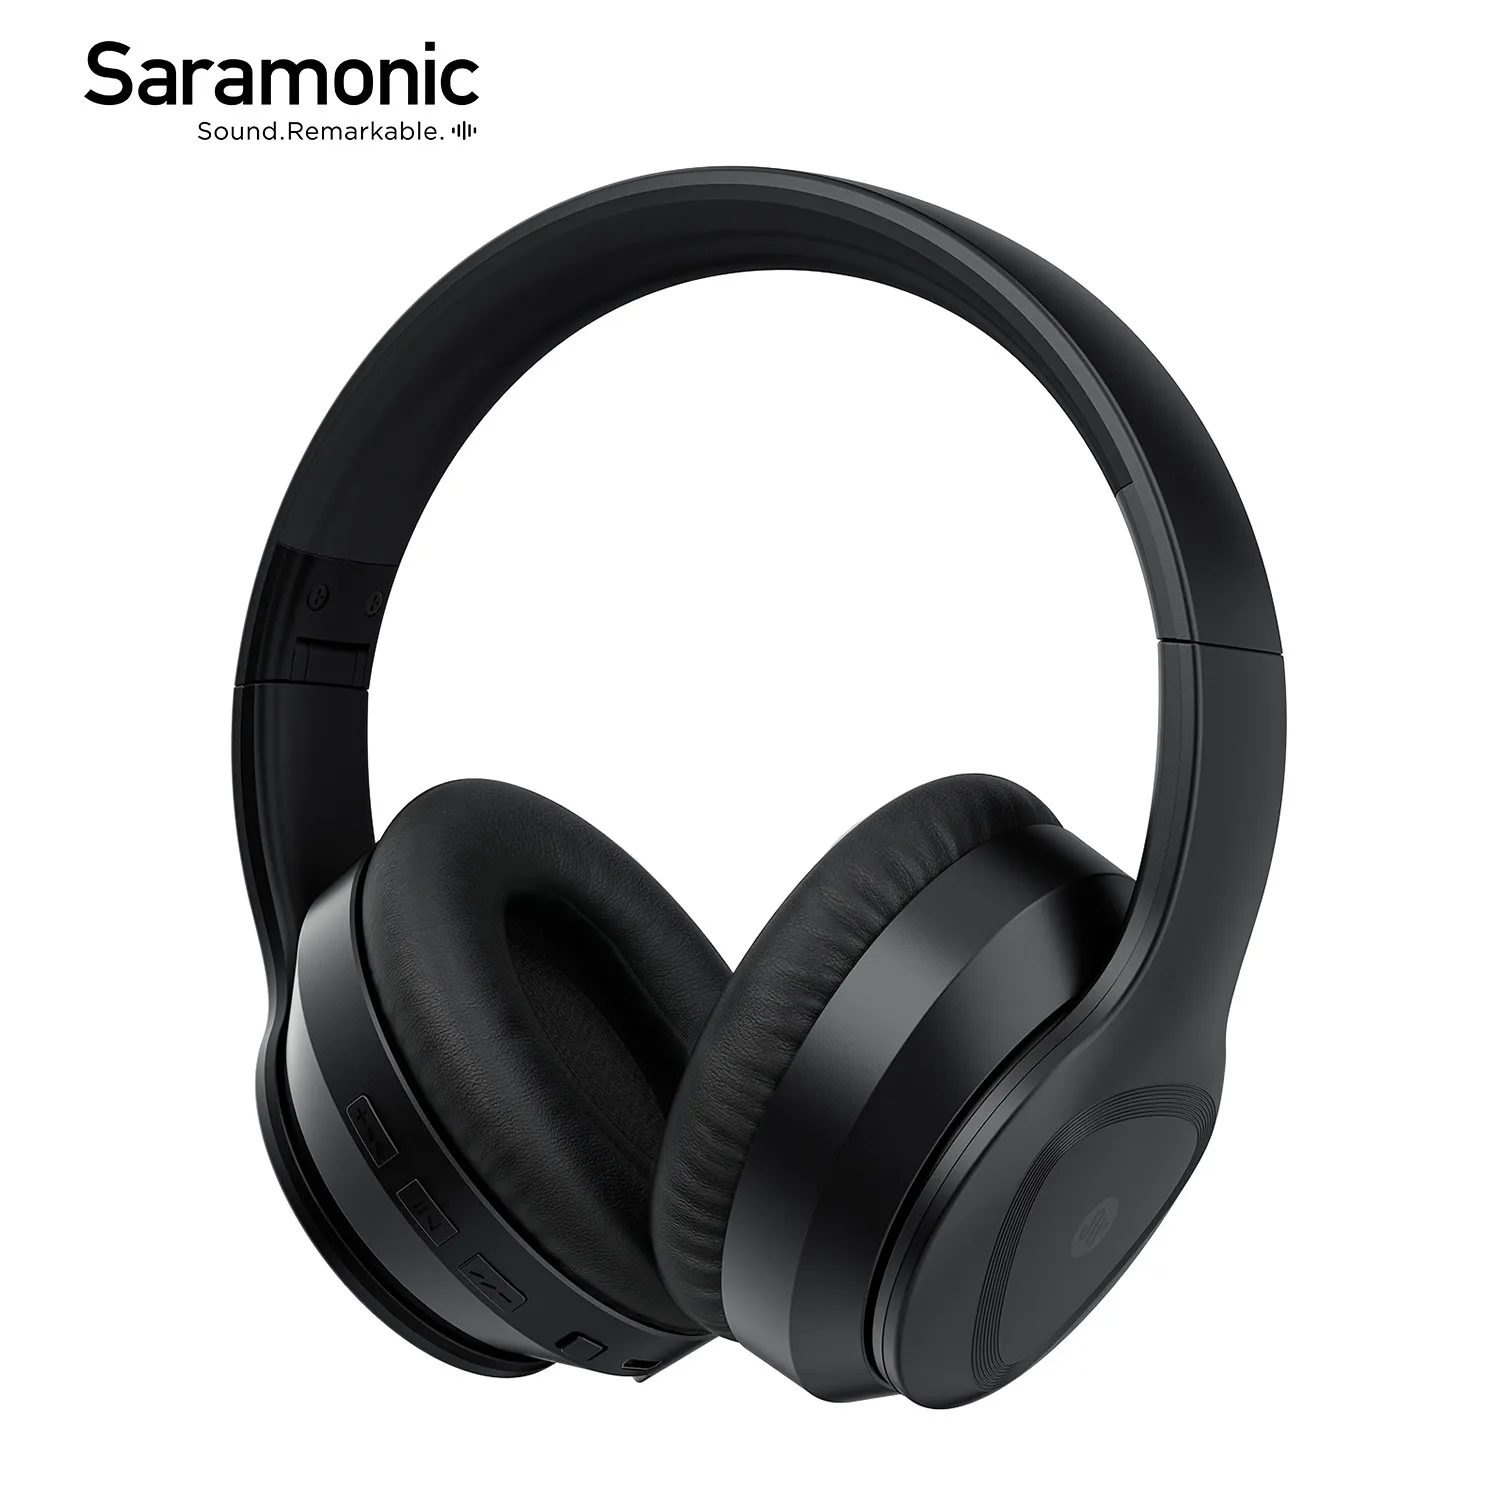 

Saramonic SR-BH600 Wireless Bluetooth Headset for PC Smartphone Computer Gaming Active Noise-Cancelling Headphones 16H Playtime